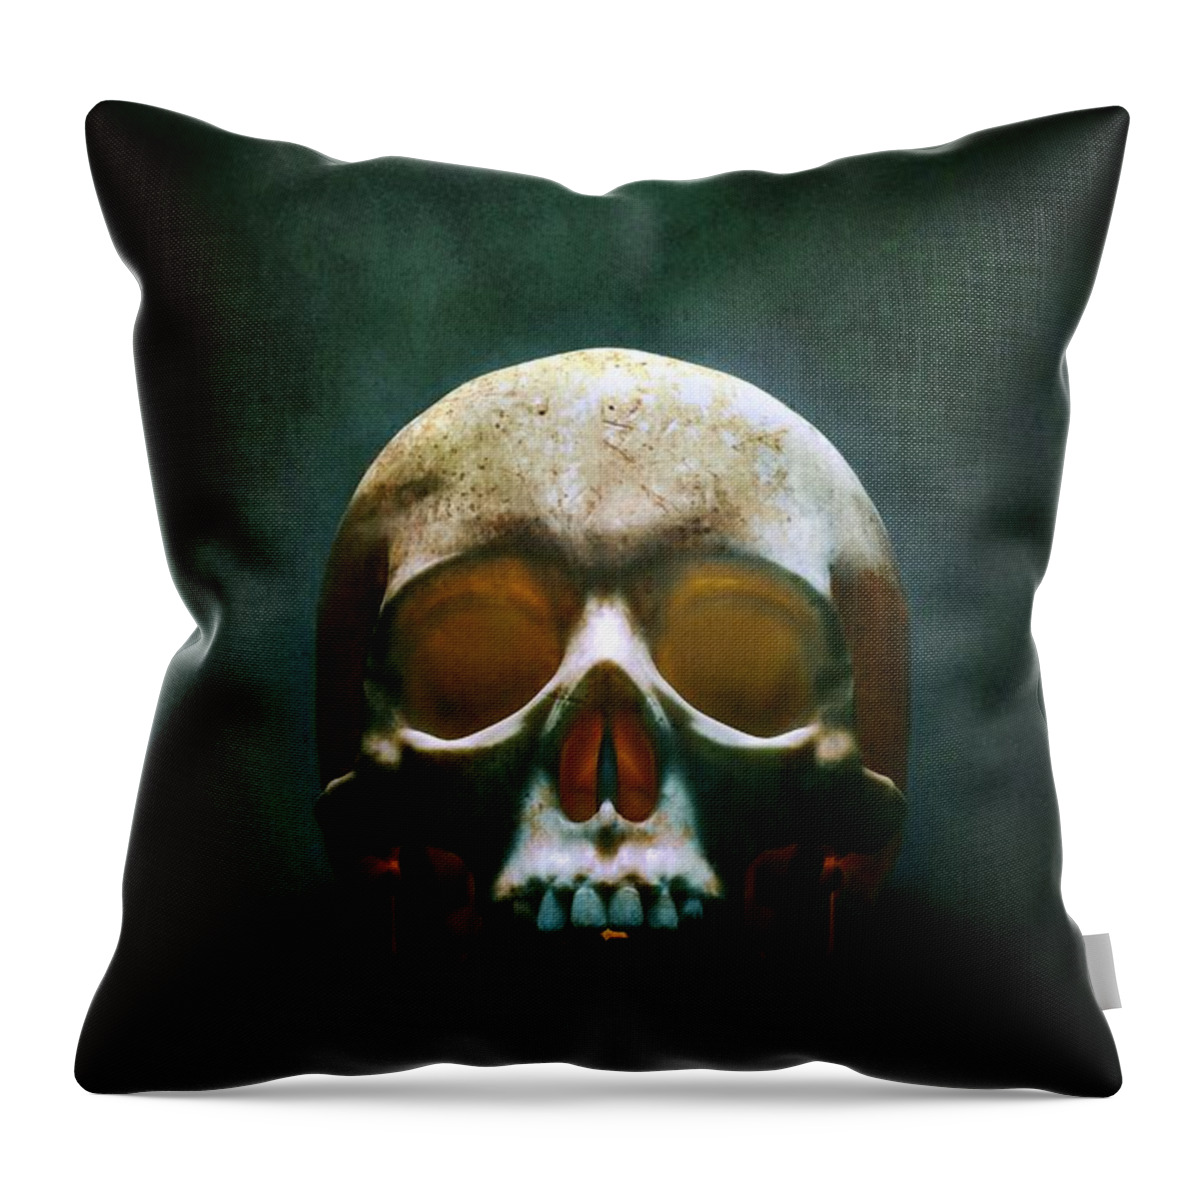 Skull Throw Pillow featuring the photograph Human Skull by Carlos Caetano